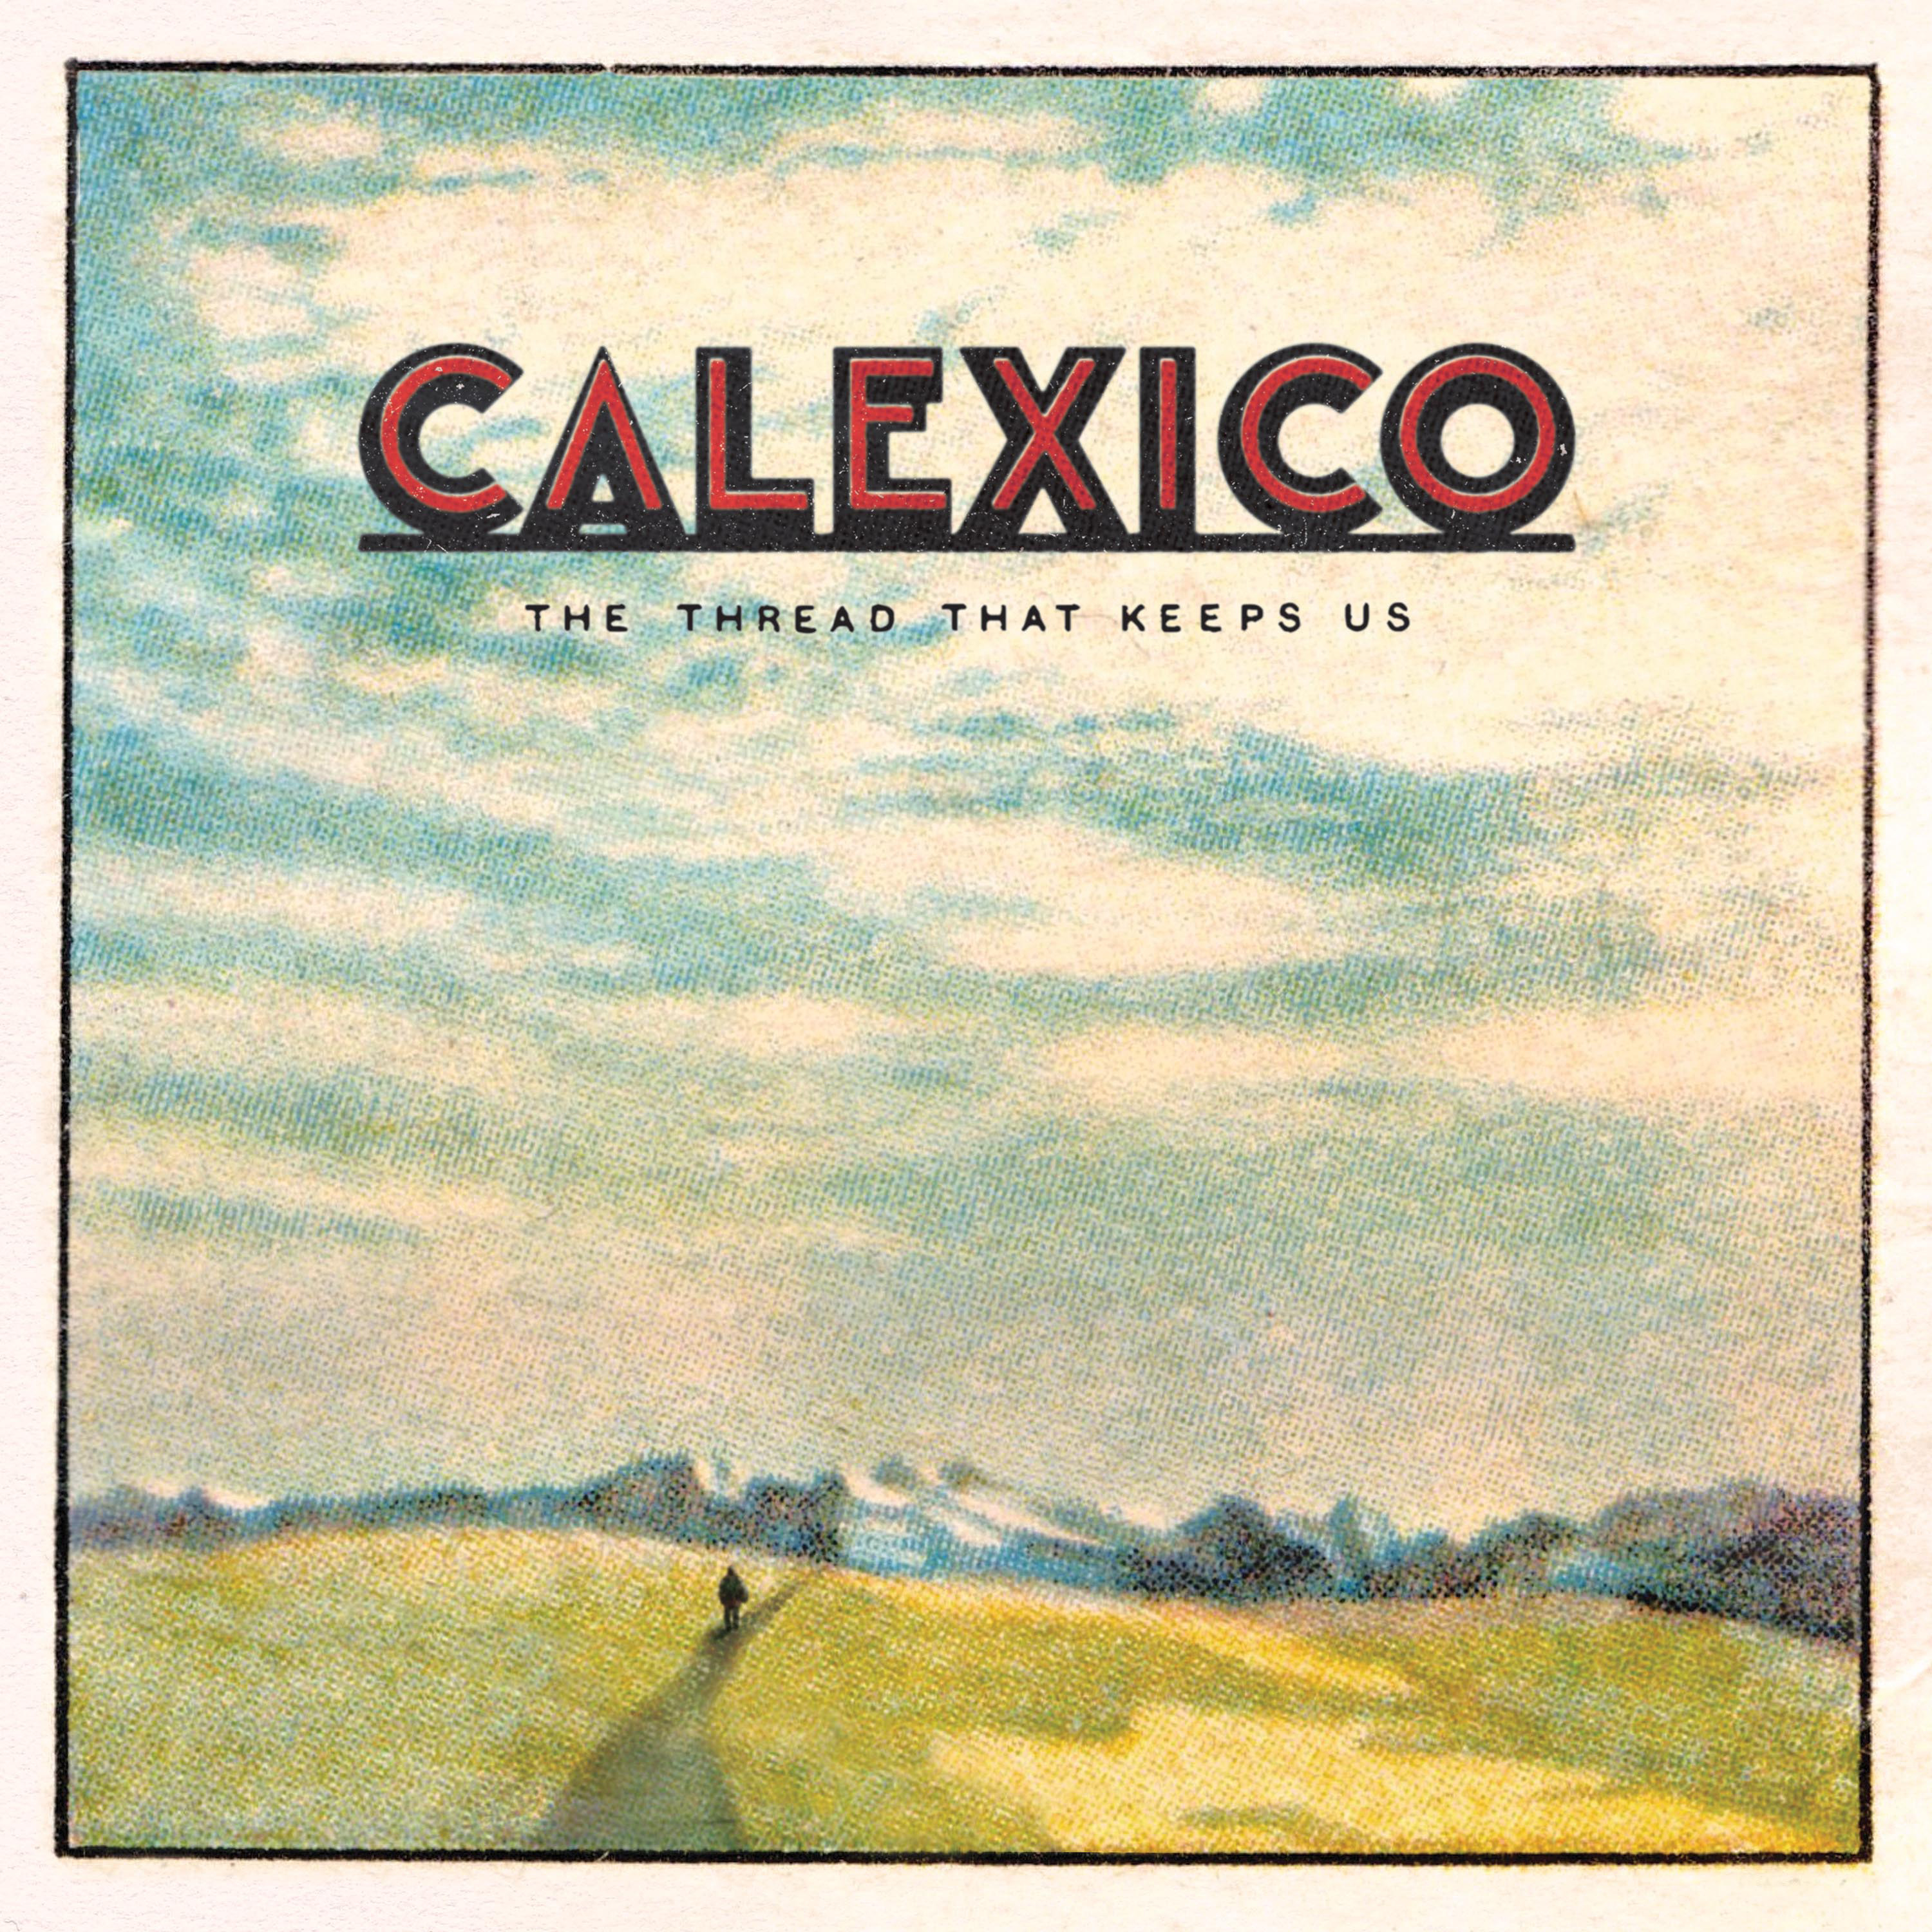 - Keeps - That (CD) Calexico Us Thread The